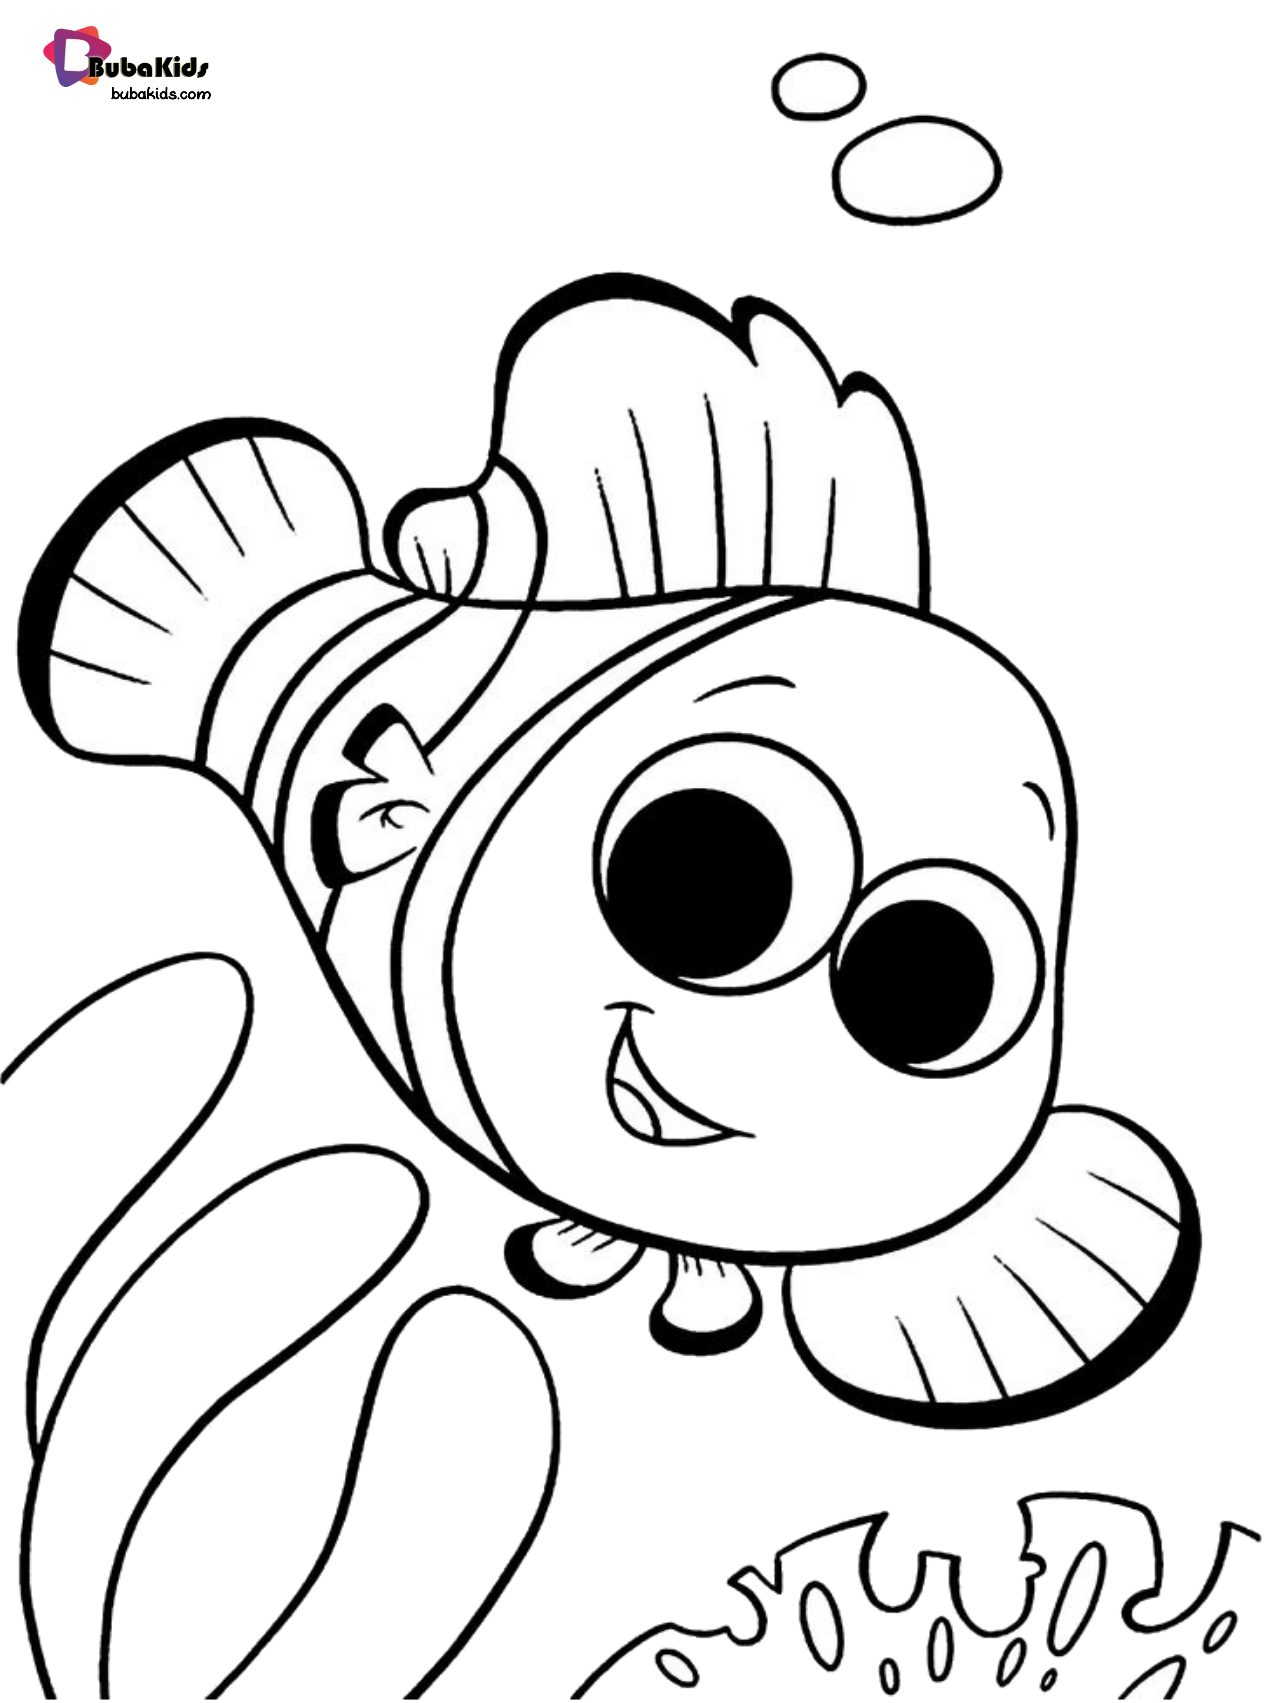 Finding Nemo printable coloring pages for kids Wallpaper